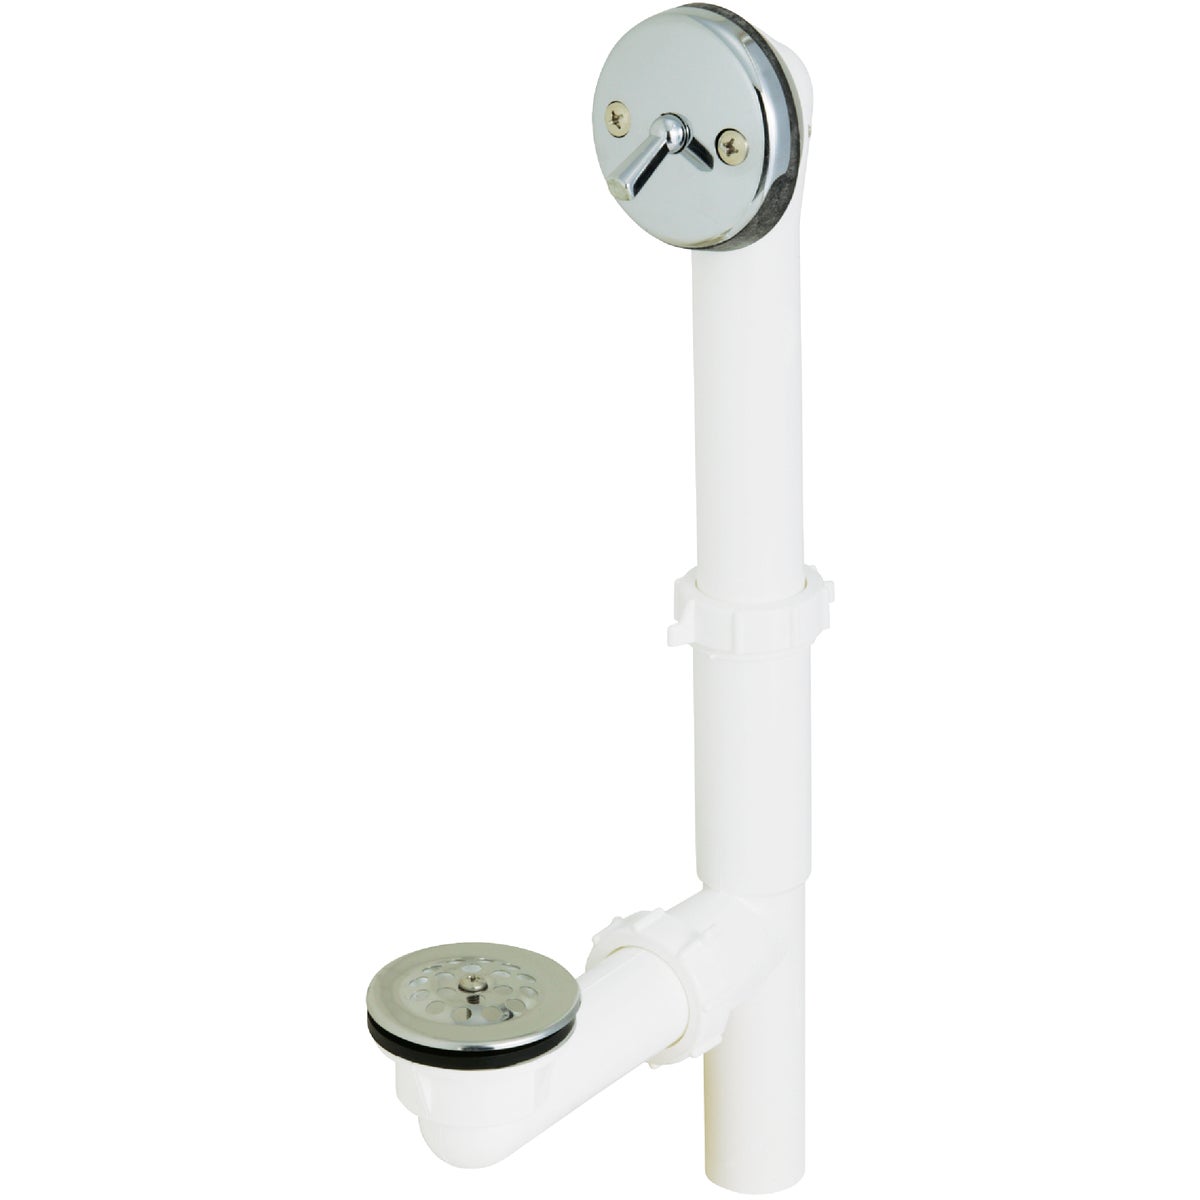 Keeney White Plastic Trip Lever Bath Drain with Polished Chrome Trim and Strainer & Dome Grid